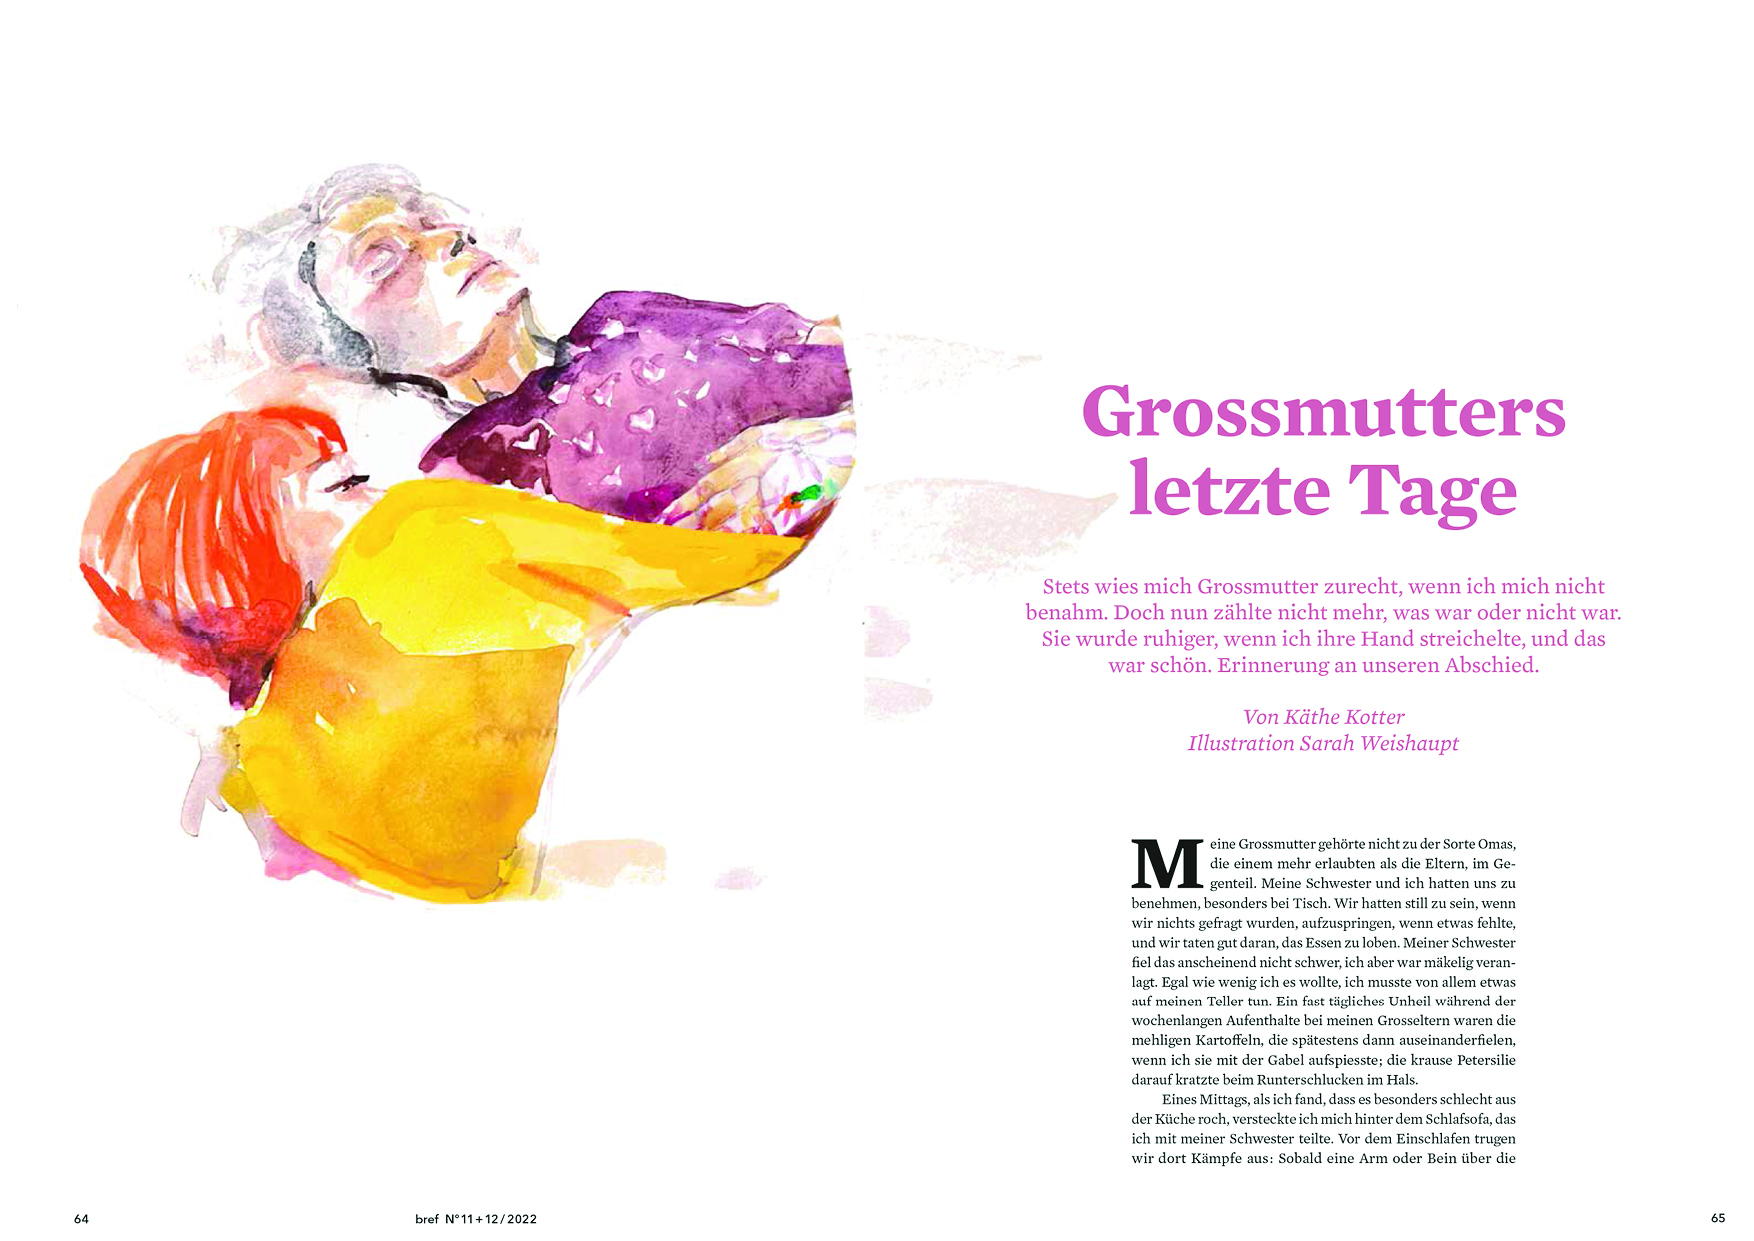 https://sarahweishaupt.ch/media/pages/home/illustration-tod-der-grossmuttermagazin-bref/631fe25d3a-1671550907/09e9f103-a064-4e34-bb1a-88539db02c0c.jpeg